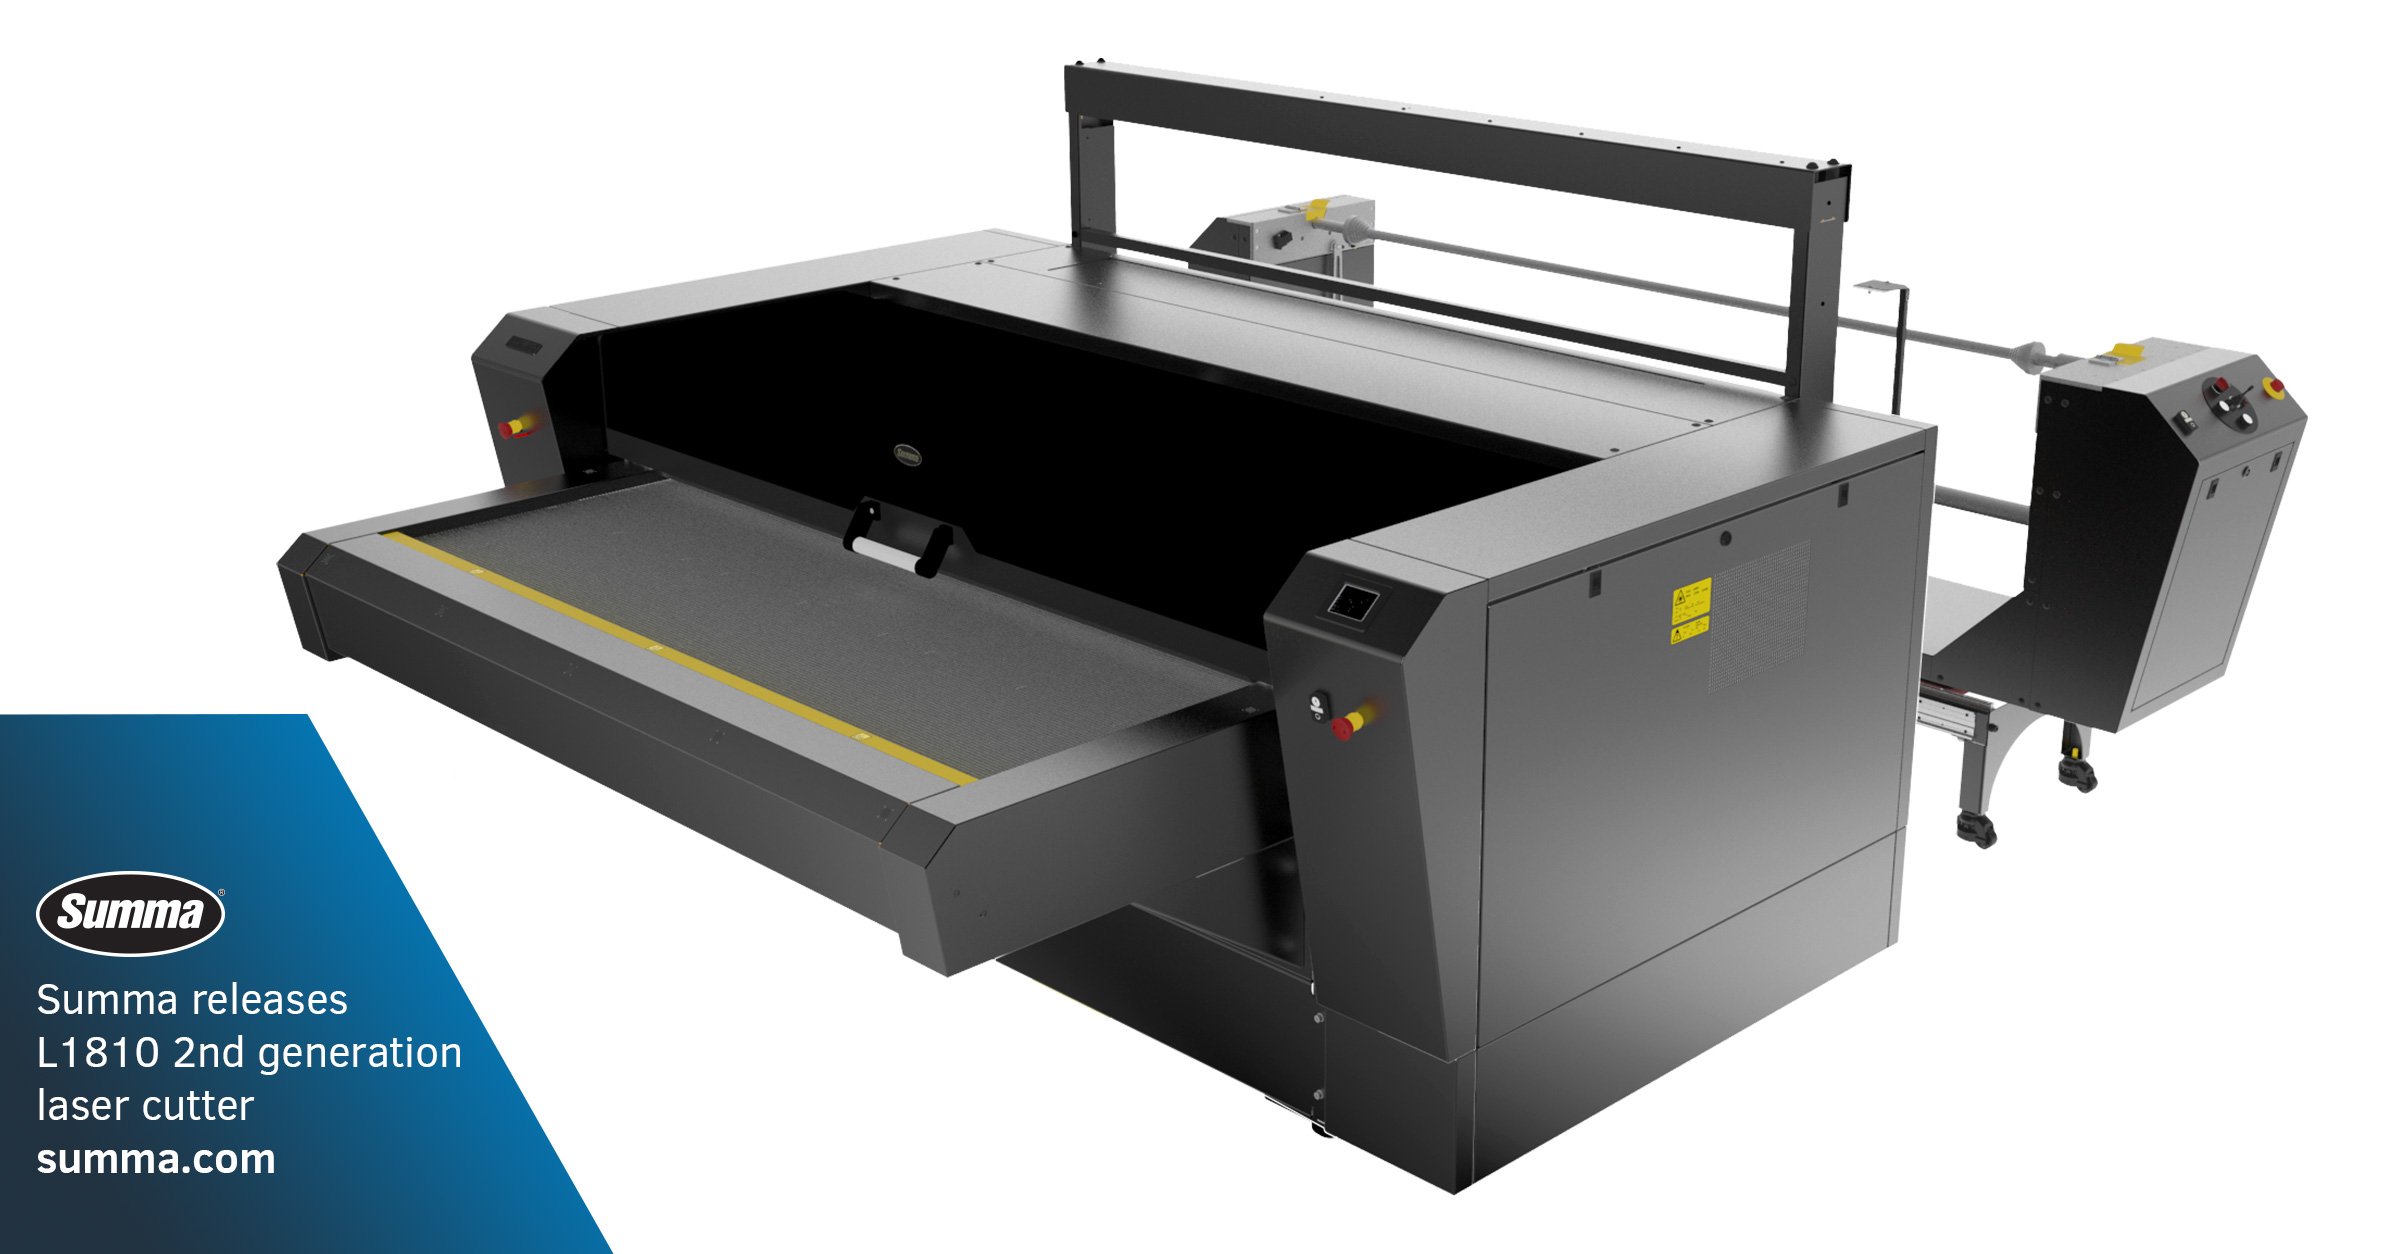 Summa L1810 2nd generation laser cutter: ready to boost your